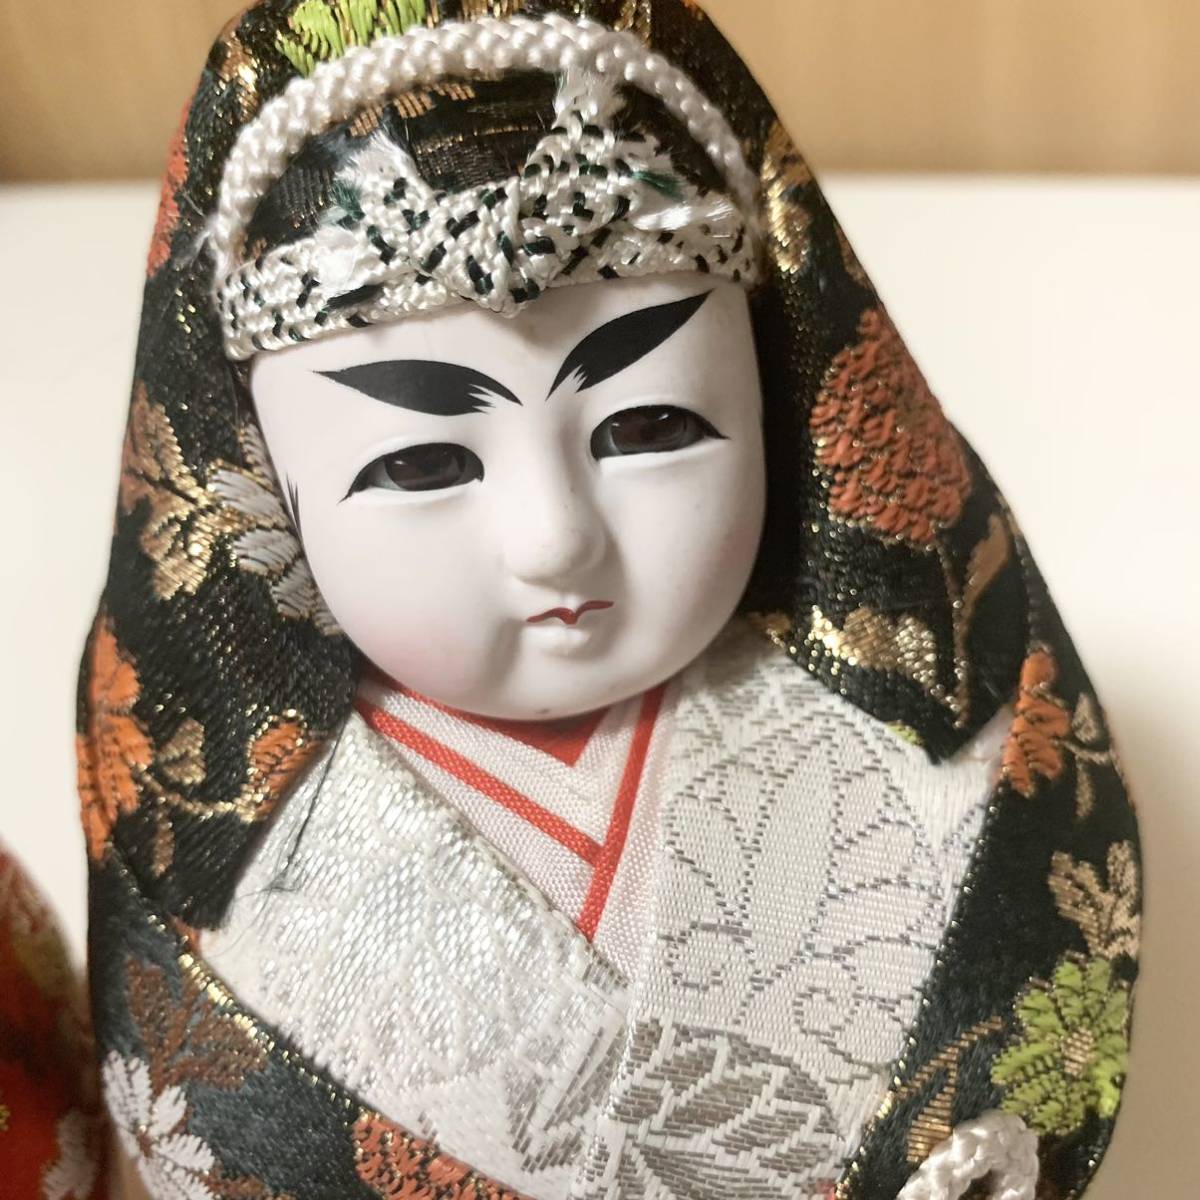 * anonymity delivery ... Showa Retro miscellaneous goods . earth toy Japanese doll doll hinaningyo large inside paint hinaningyou tradition industrial arts Hinamatsuri rare rare period thing 